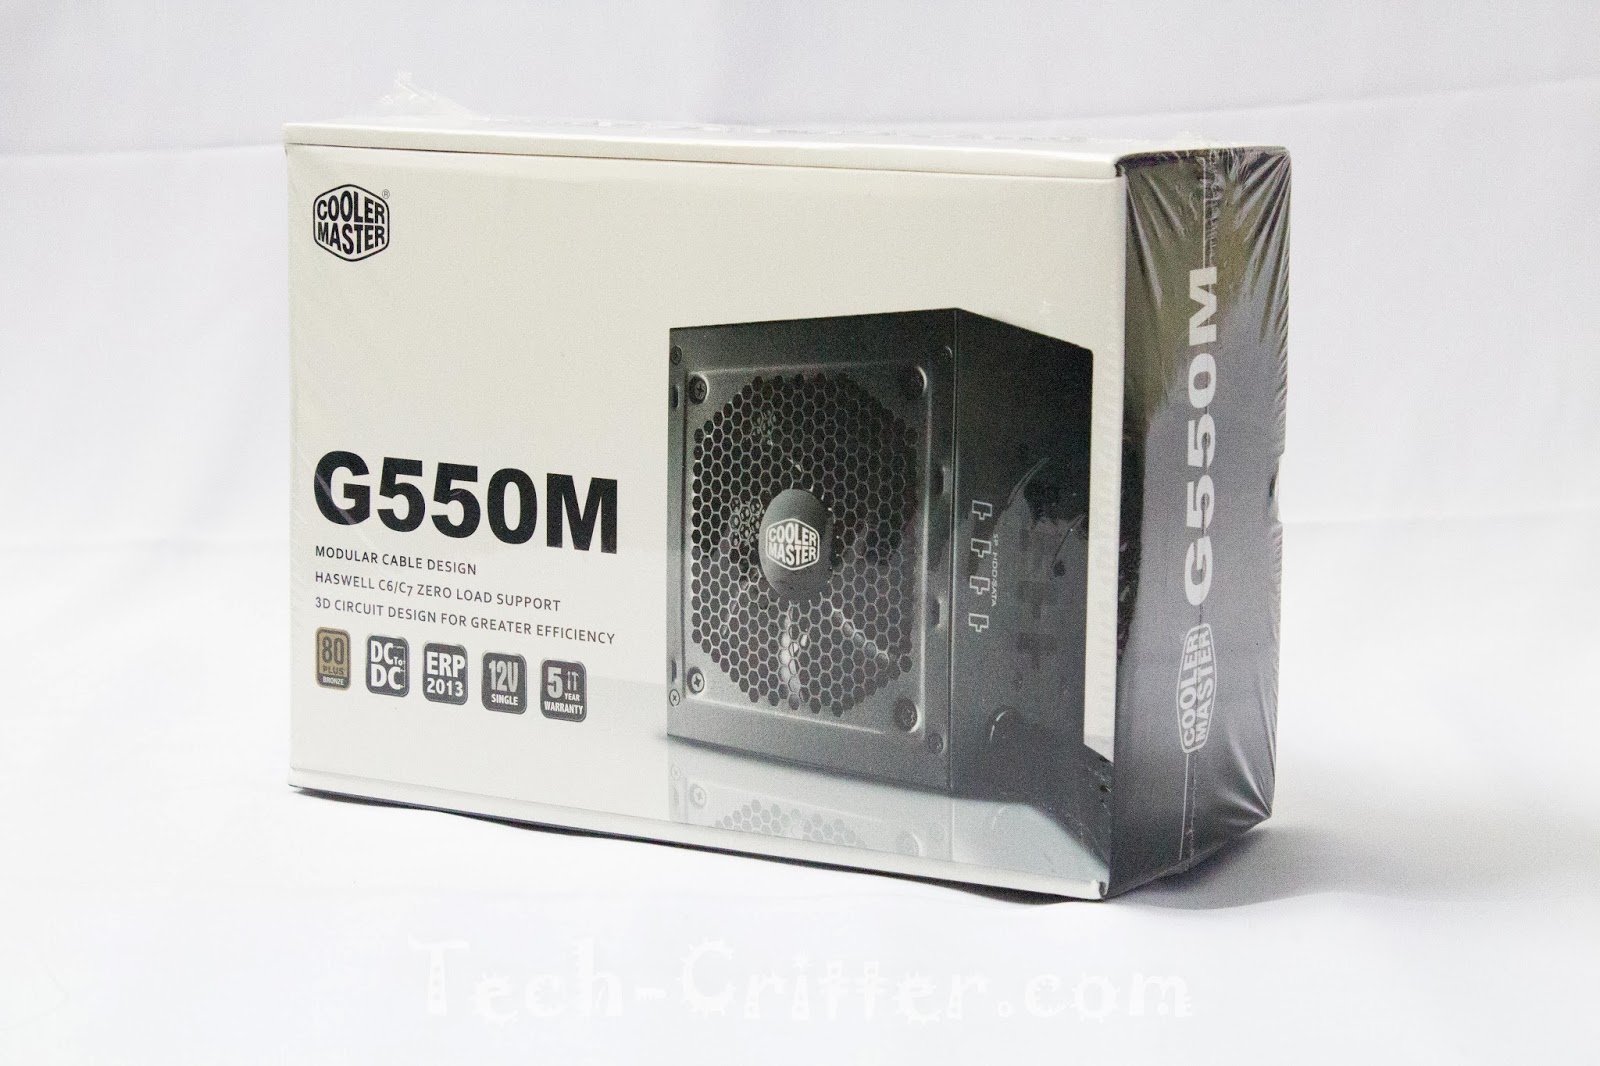 Cooler Master G550M Power Supply Unit Unboxing and Overview 6